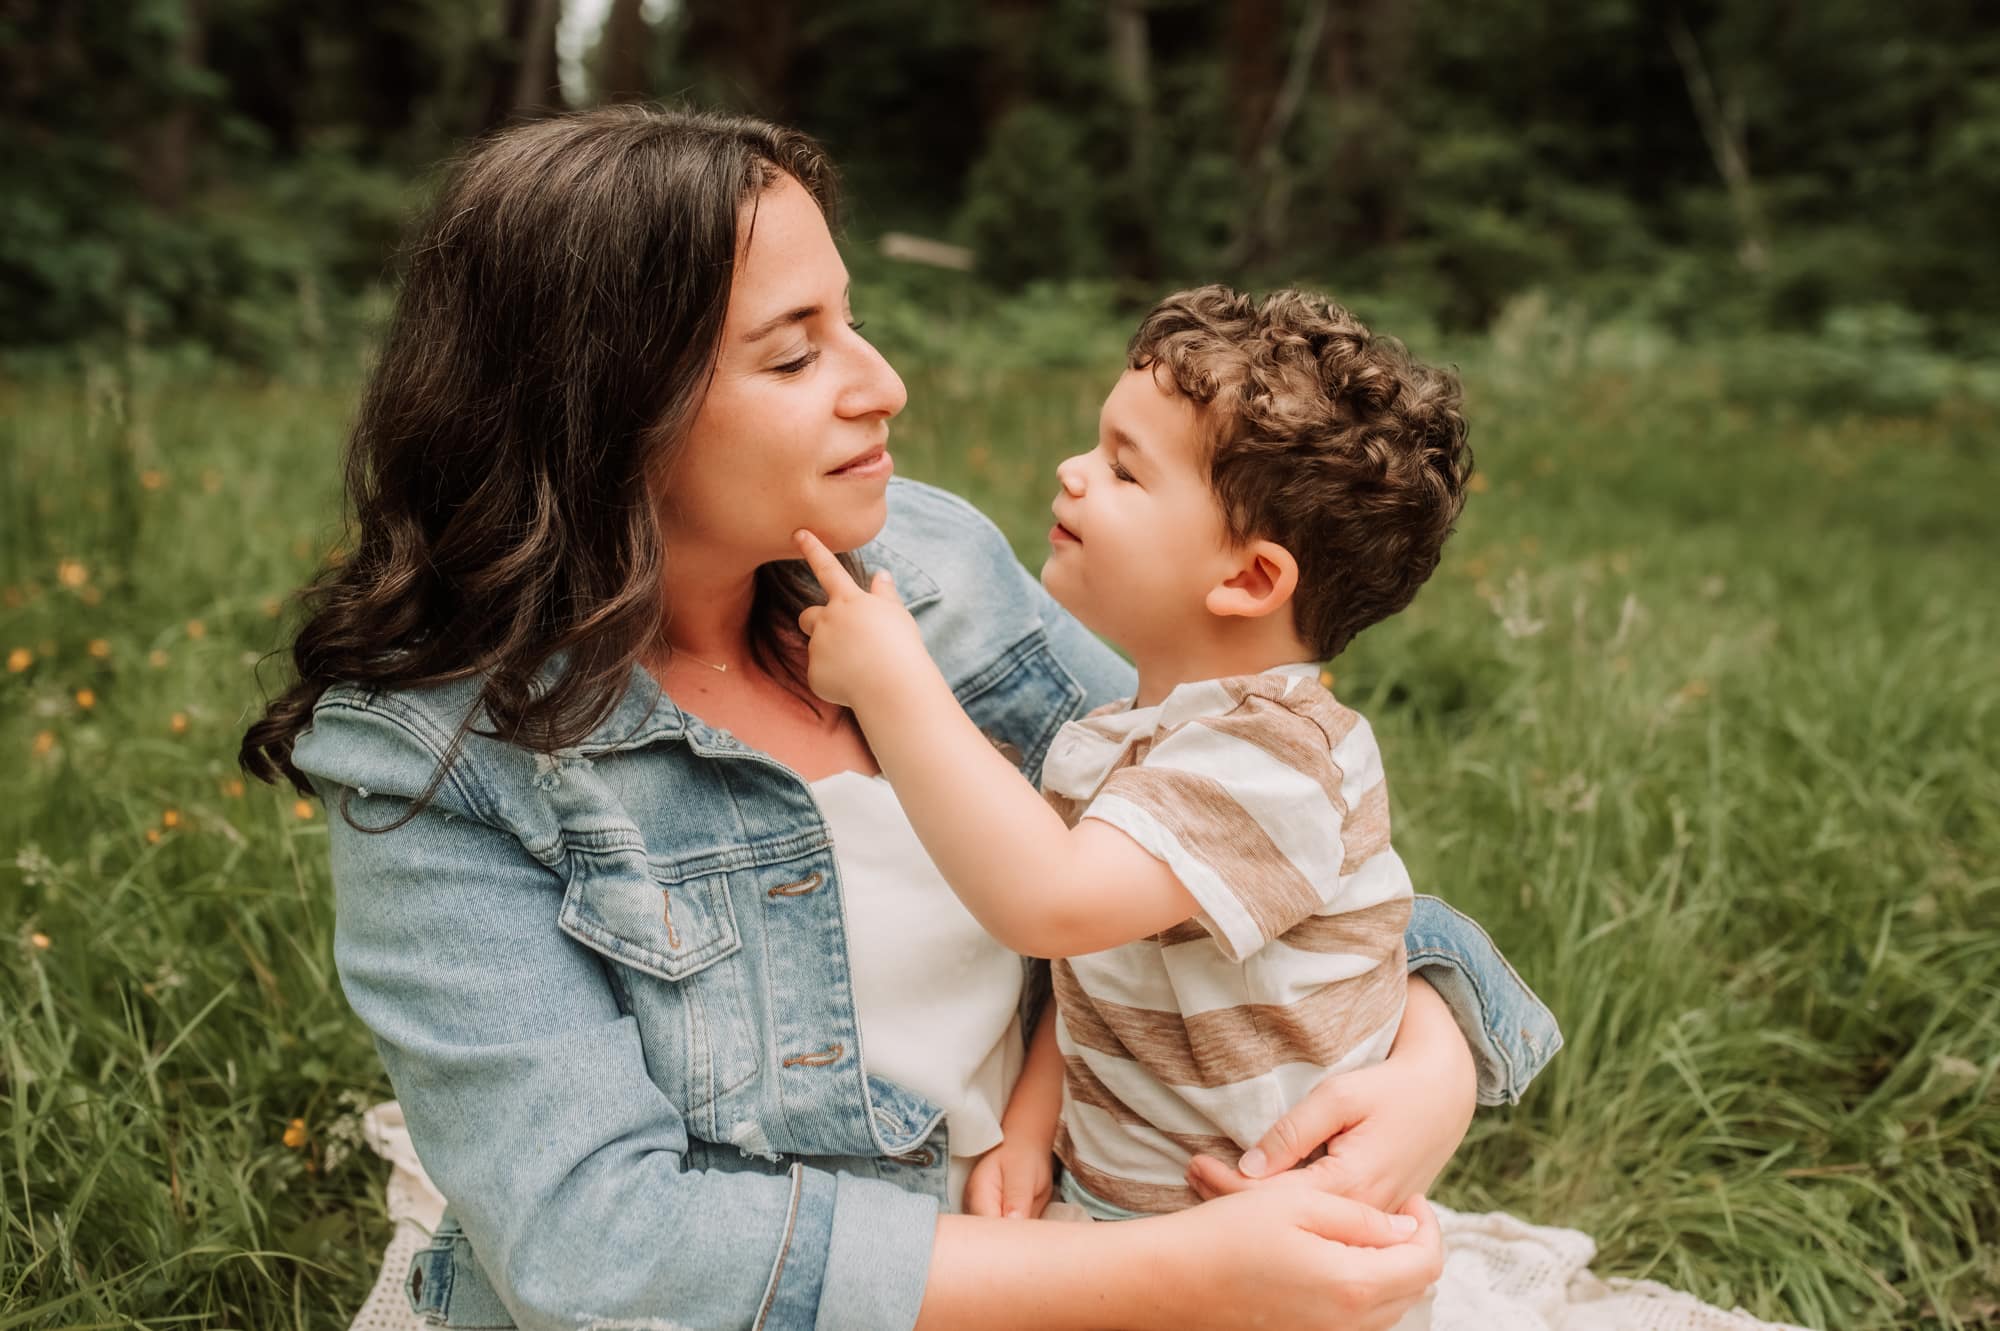 Vancouver family photographer captures a tender moment between mom and toddler son, with him softly touching her cheek.